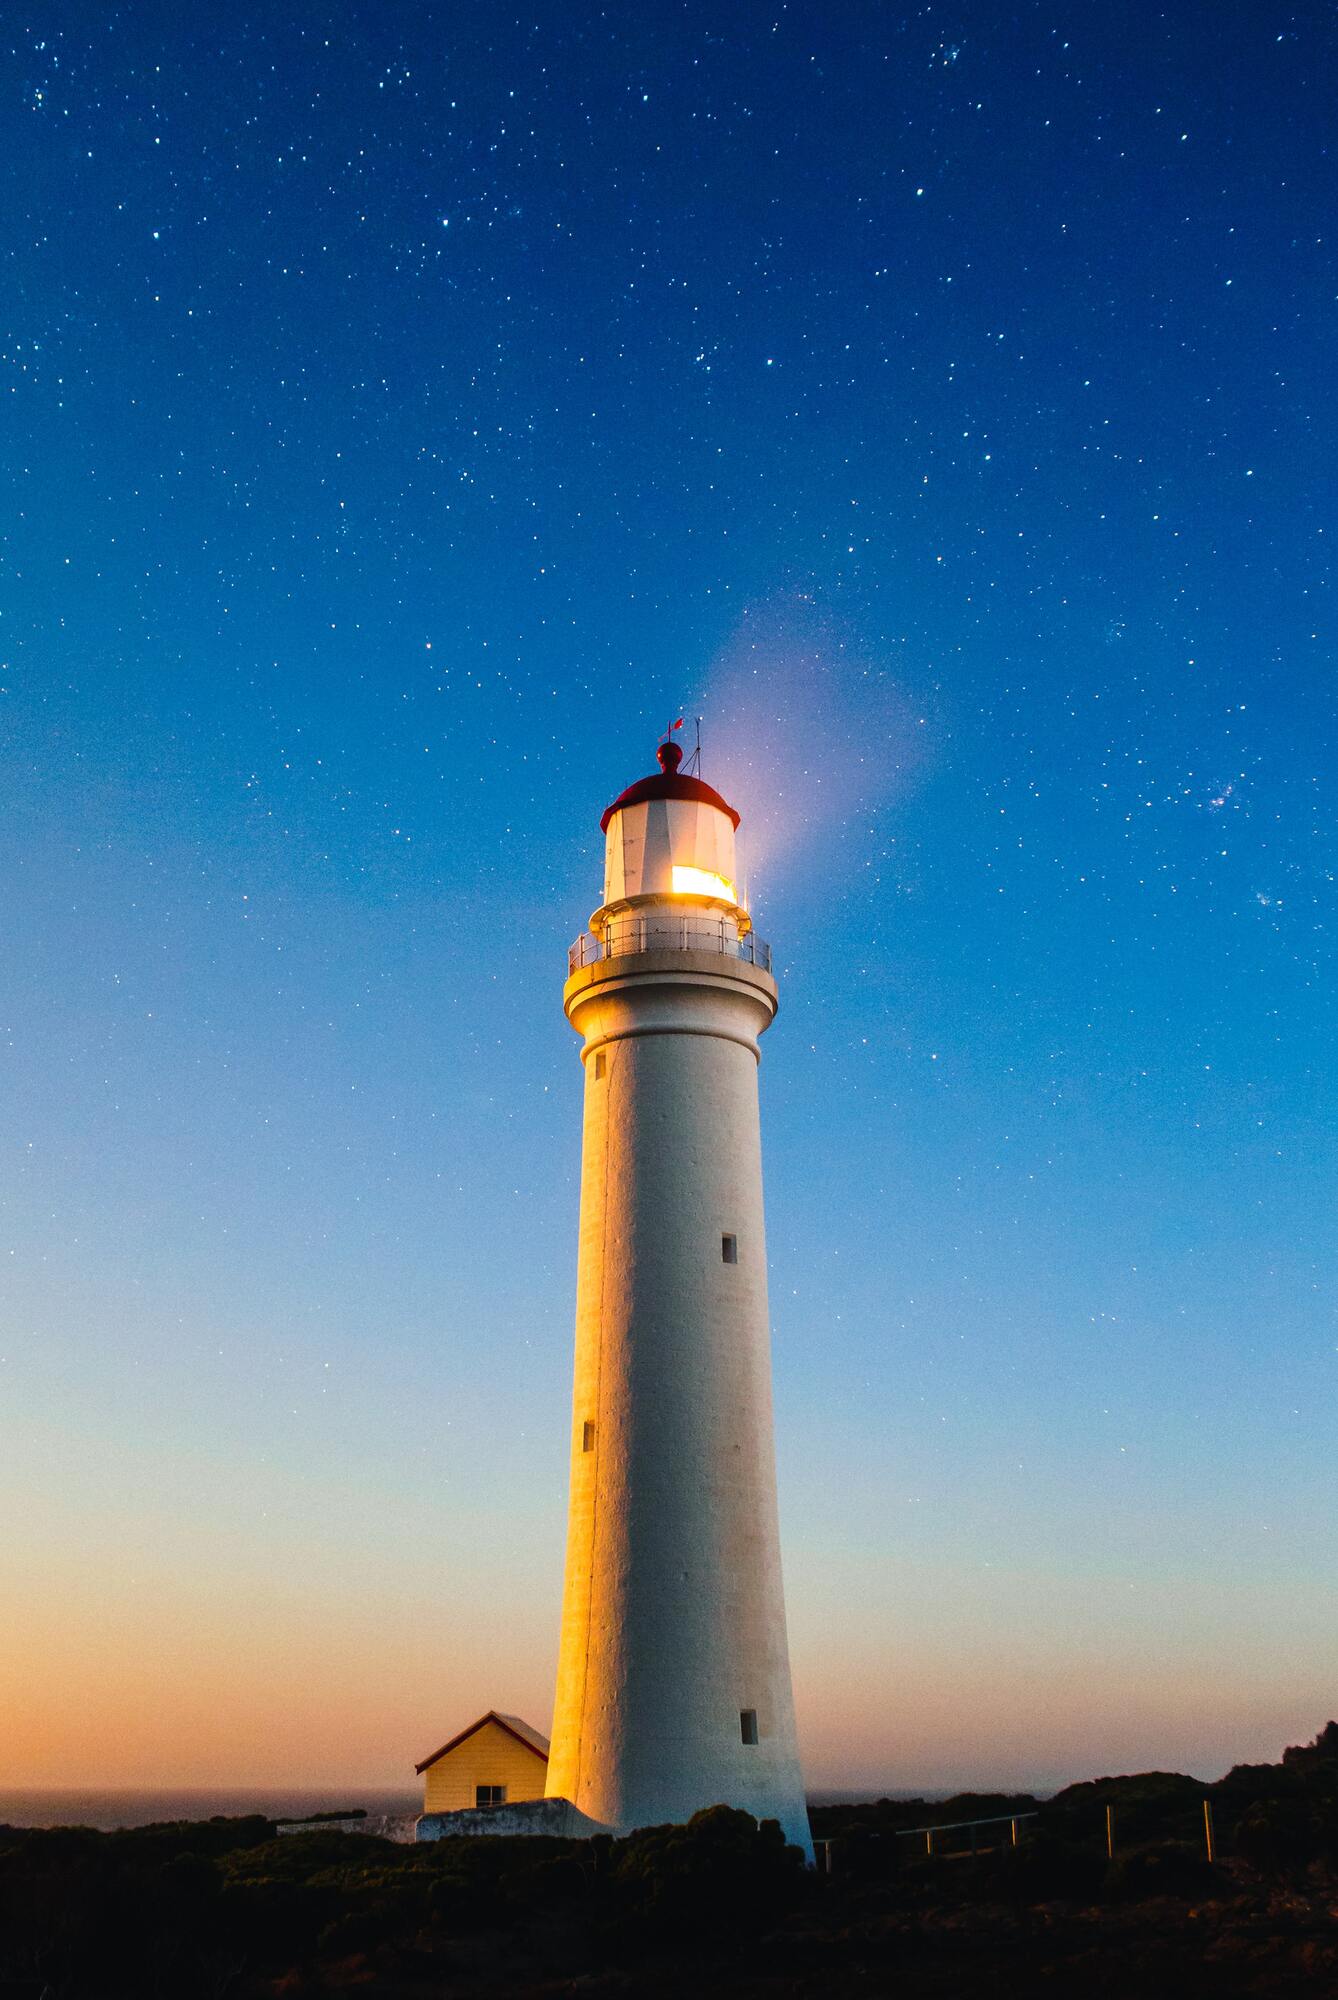 <p>The Cape Nelson Lighthouse, located in Portland, is a major tourist attraction. Its white light can be seen up to 20 miles offshore. People who visit tend to make endless photographs of its exciting landscape.</p> <p>Photo: Joshua Hibbert / Unsplash</p>